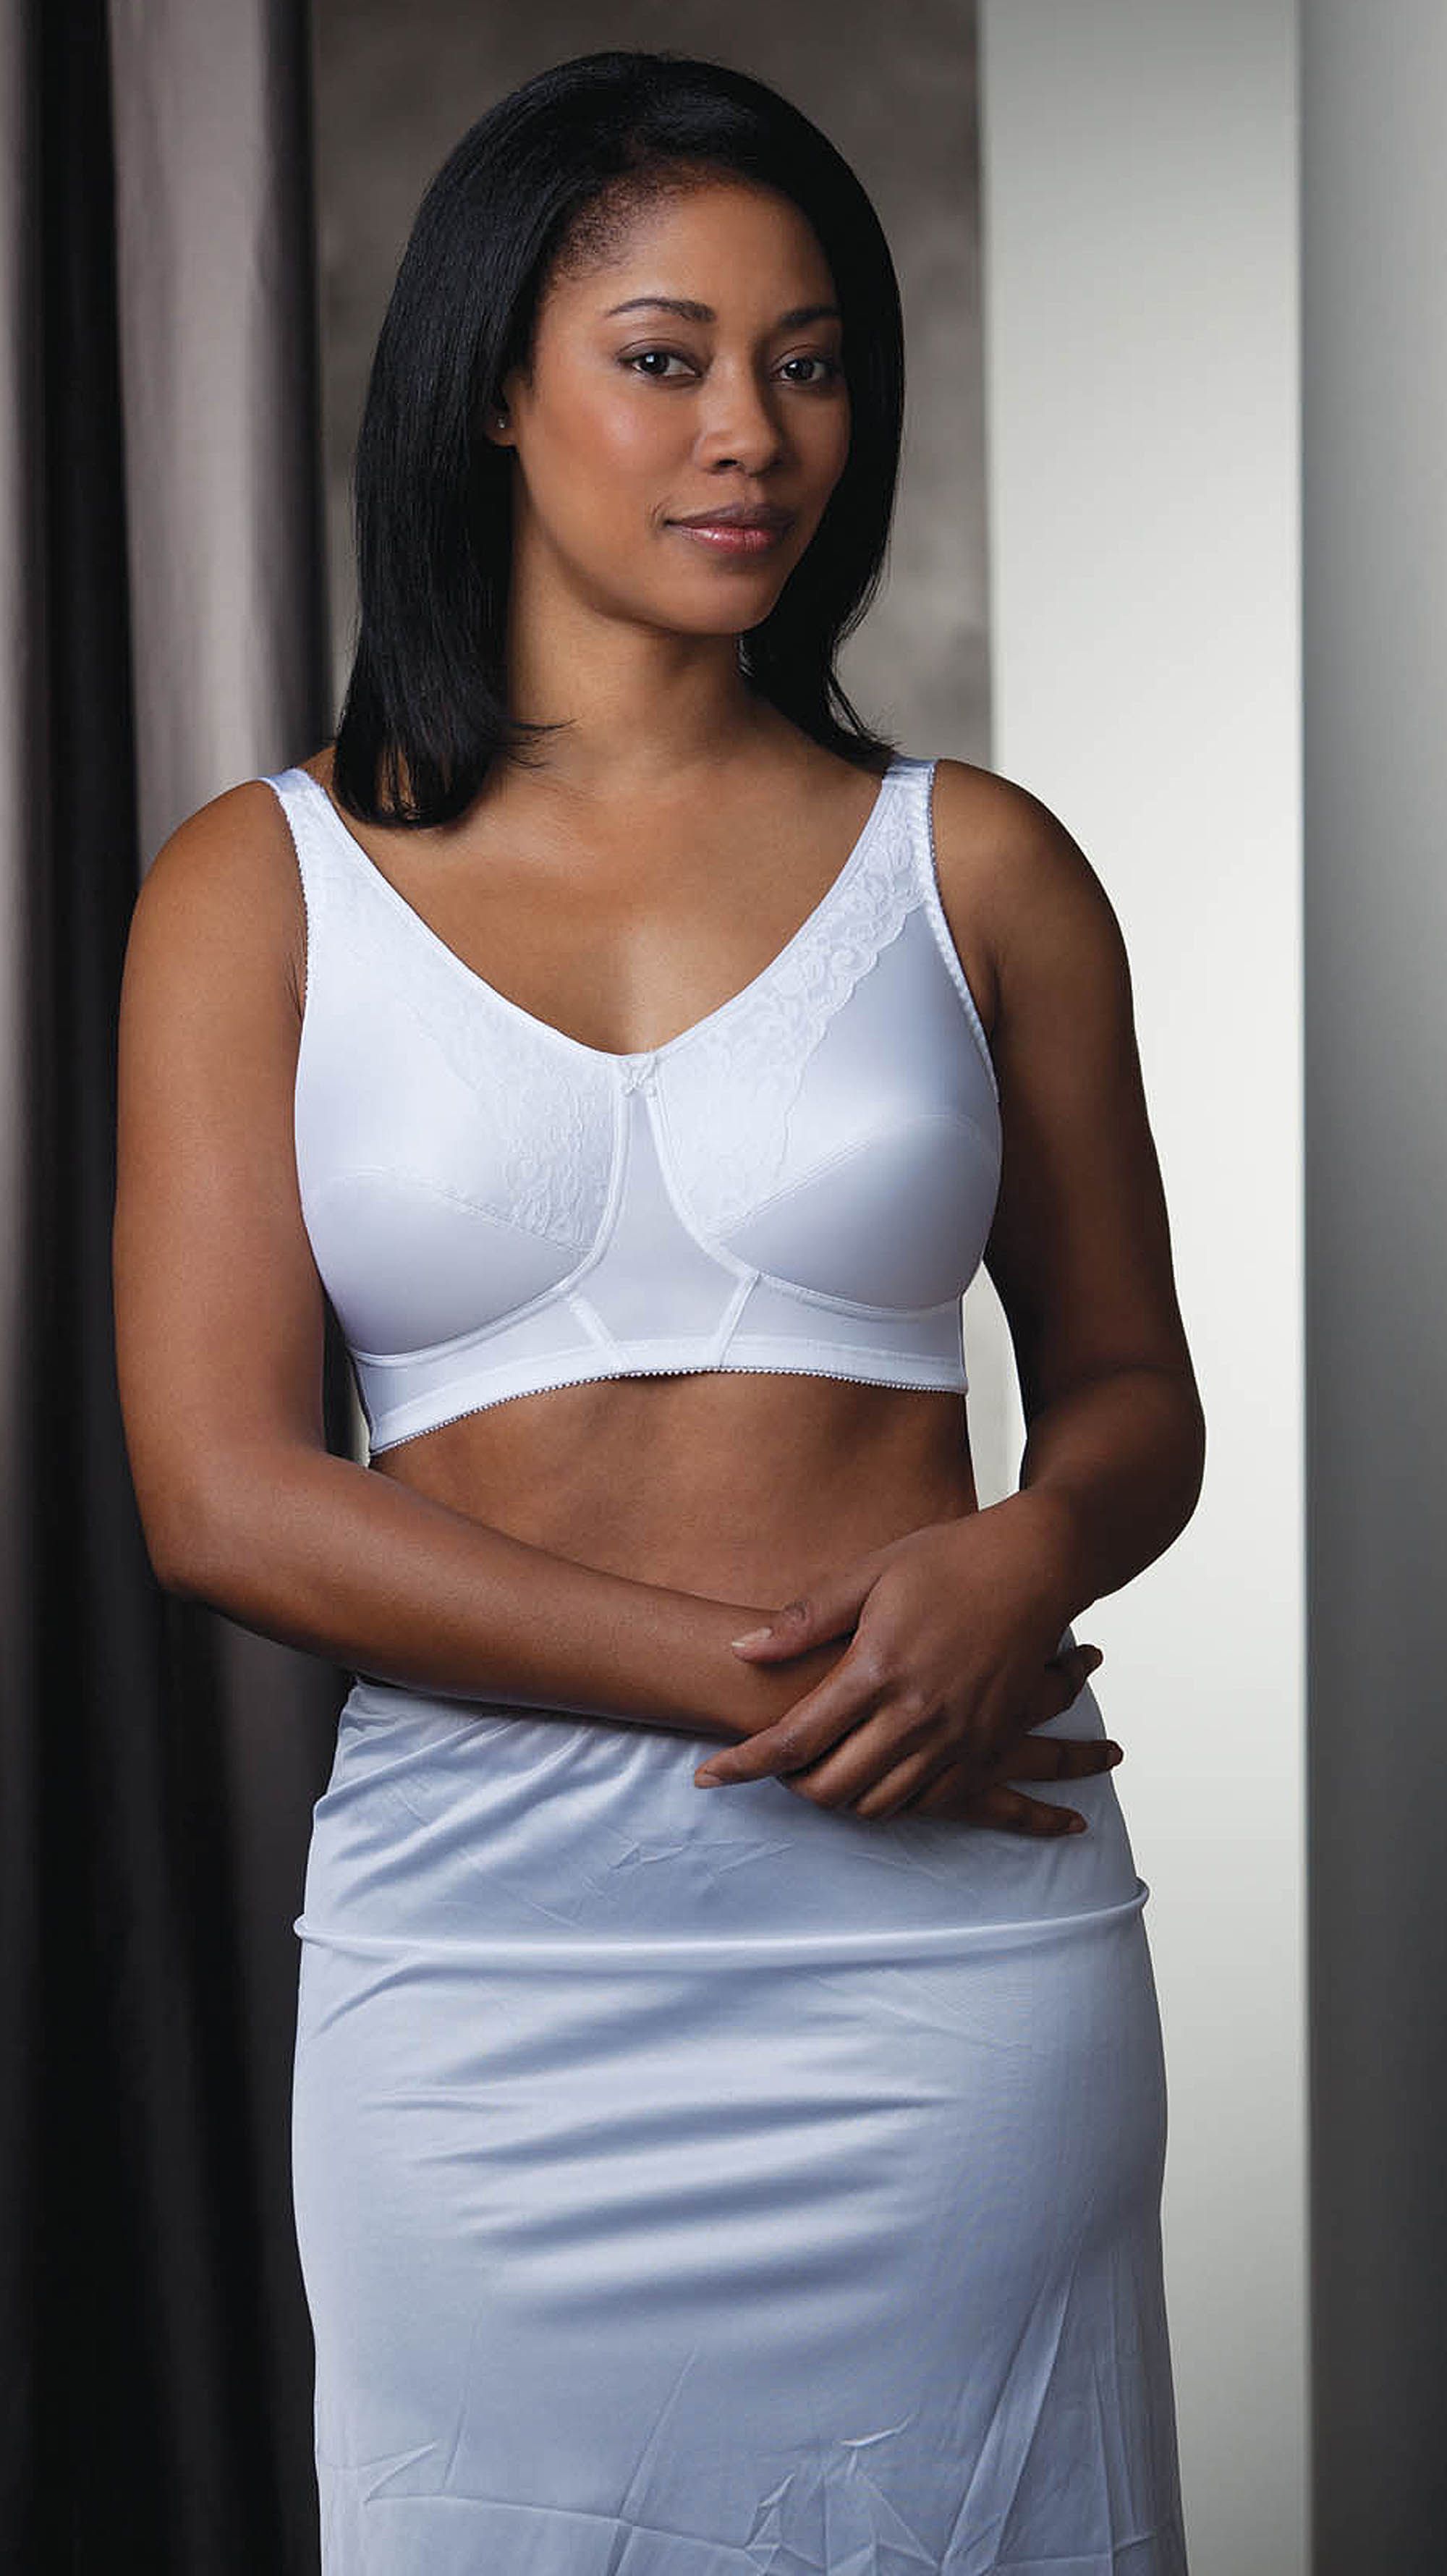  Trulife - Women's Mastectomy Bras / Women's Bras: Clothing,  Shoes & Jewelry